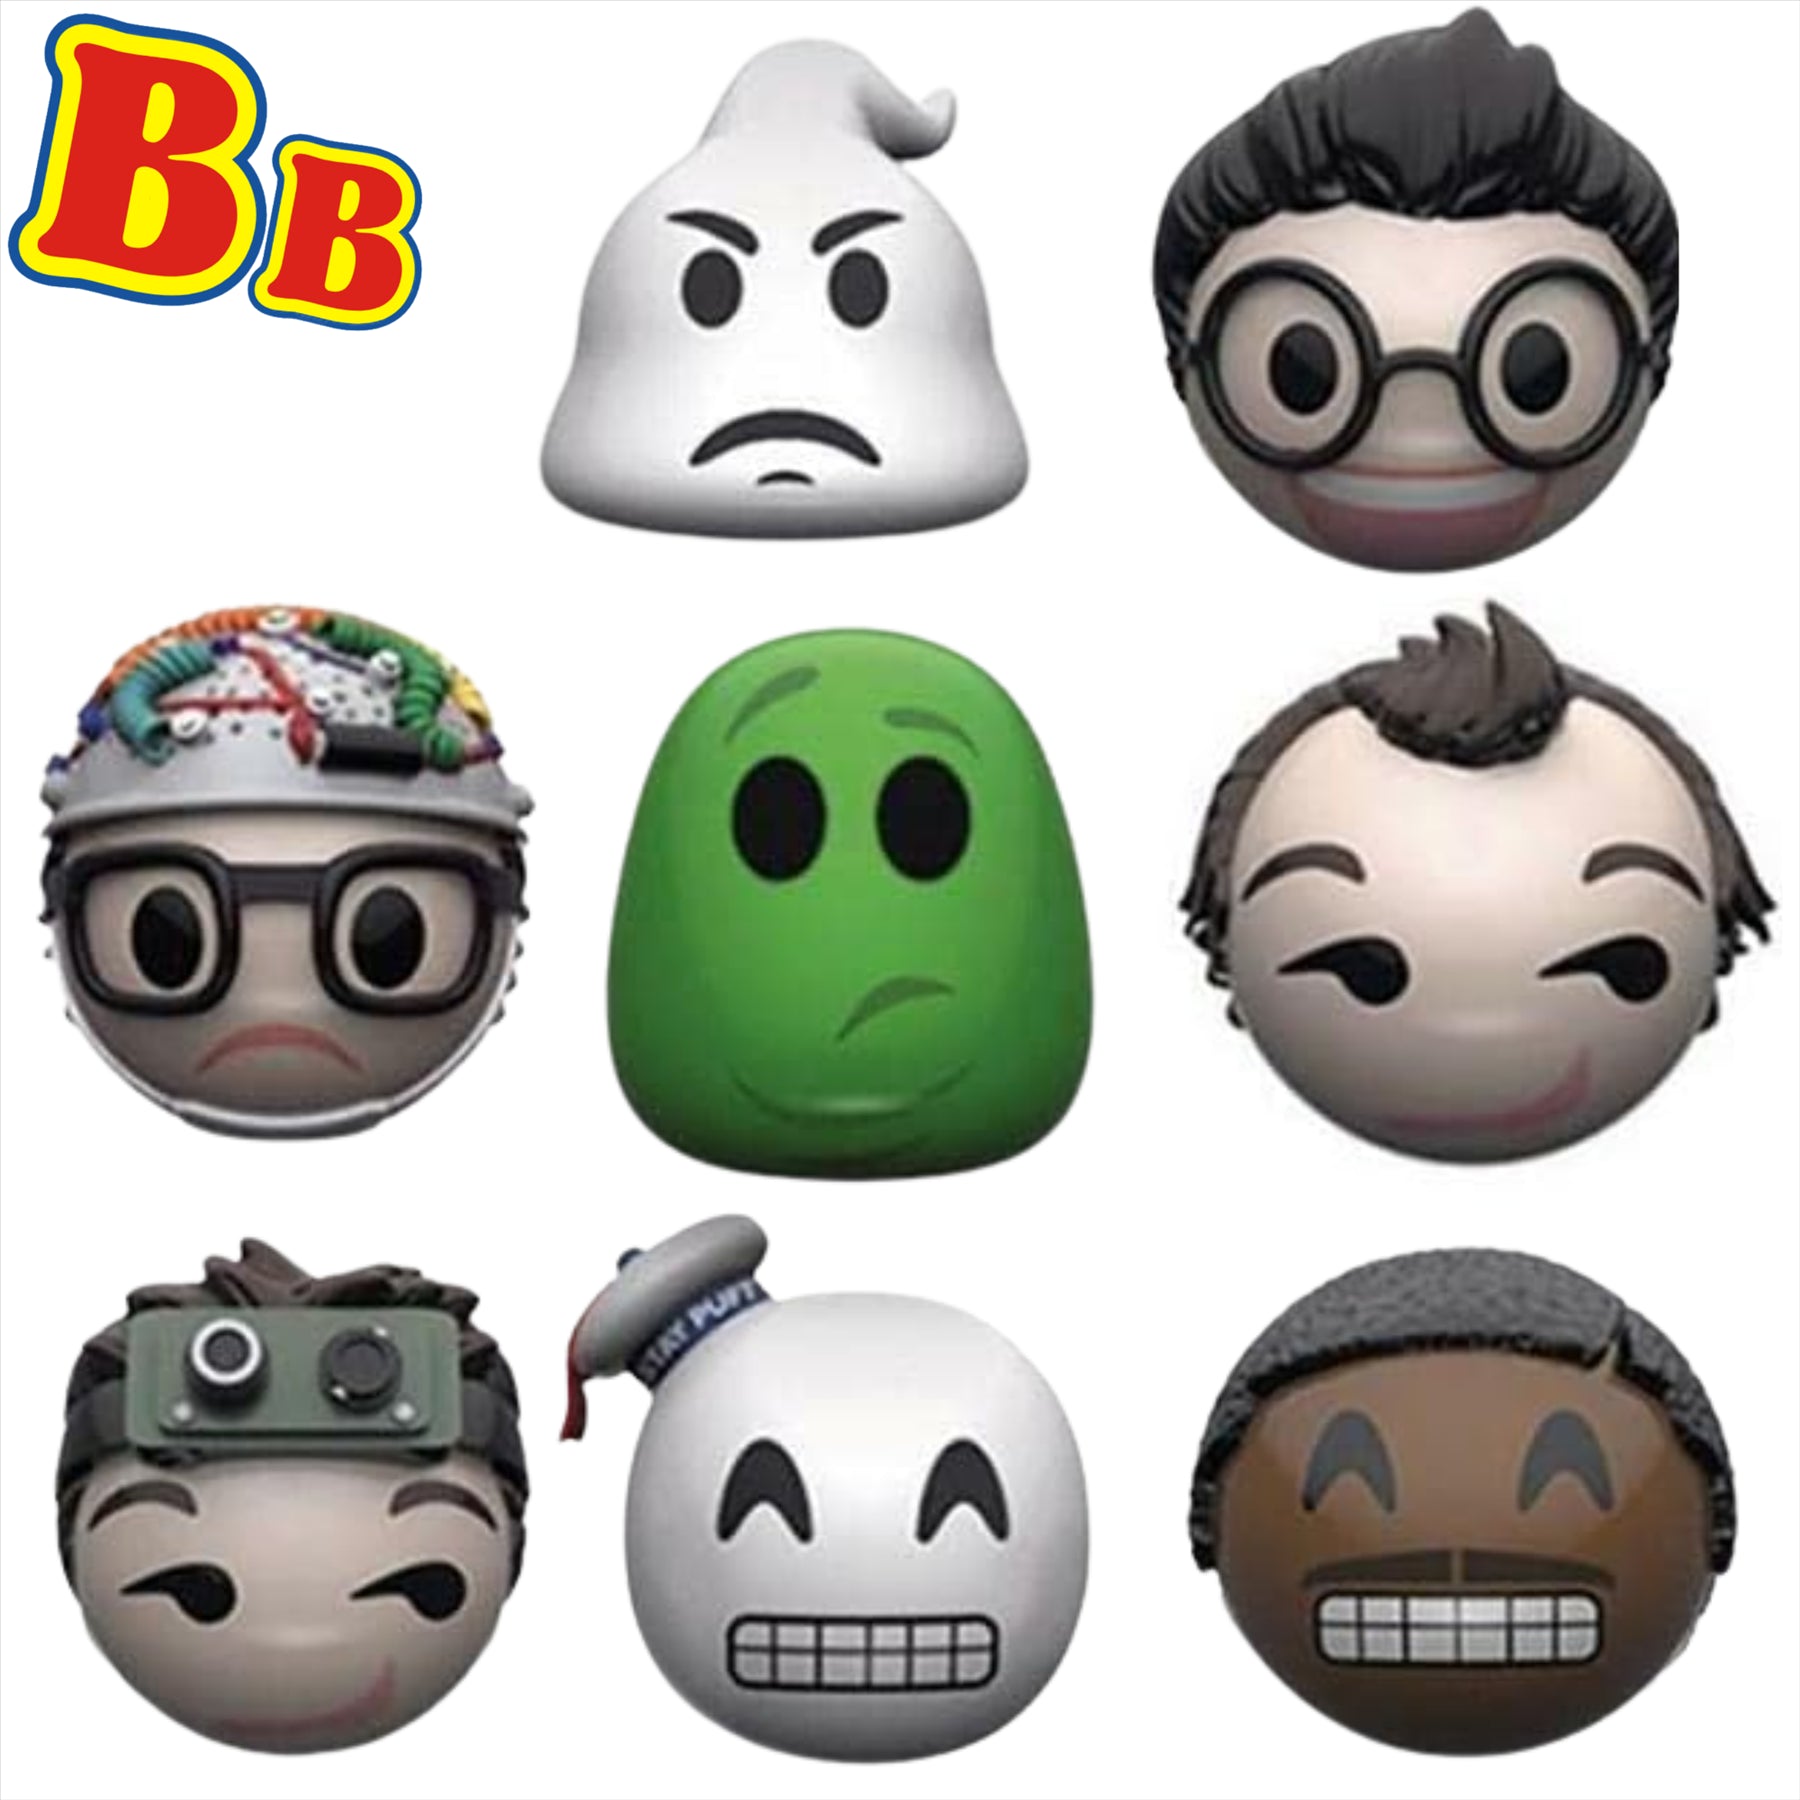 Ghostbusters - FunkoMyMoji Identified 4cm Collectible & Highly Detailed Figure Heads - Set 1 8-Pack - Toptoys2u